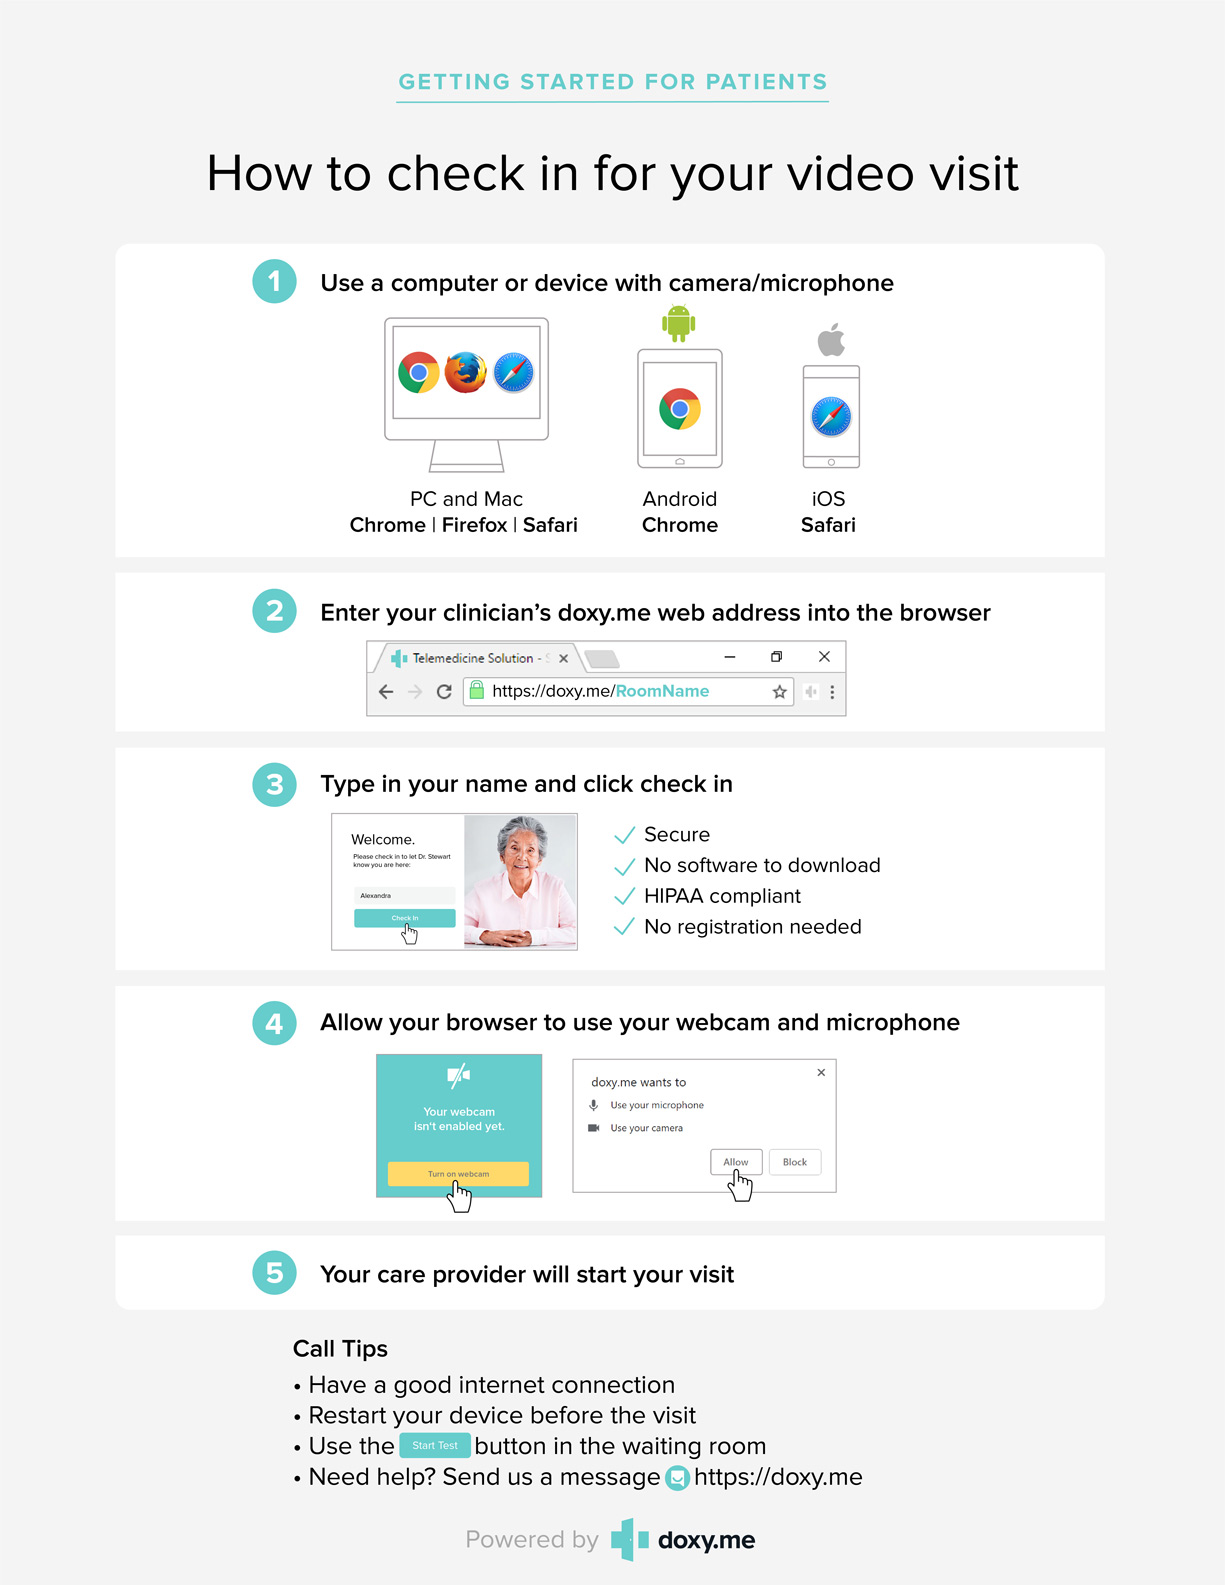 How to check in for video visit